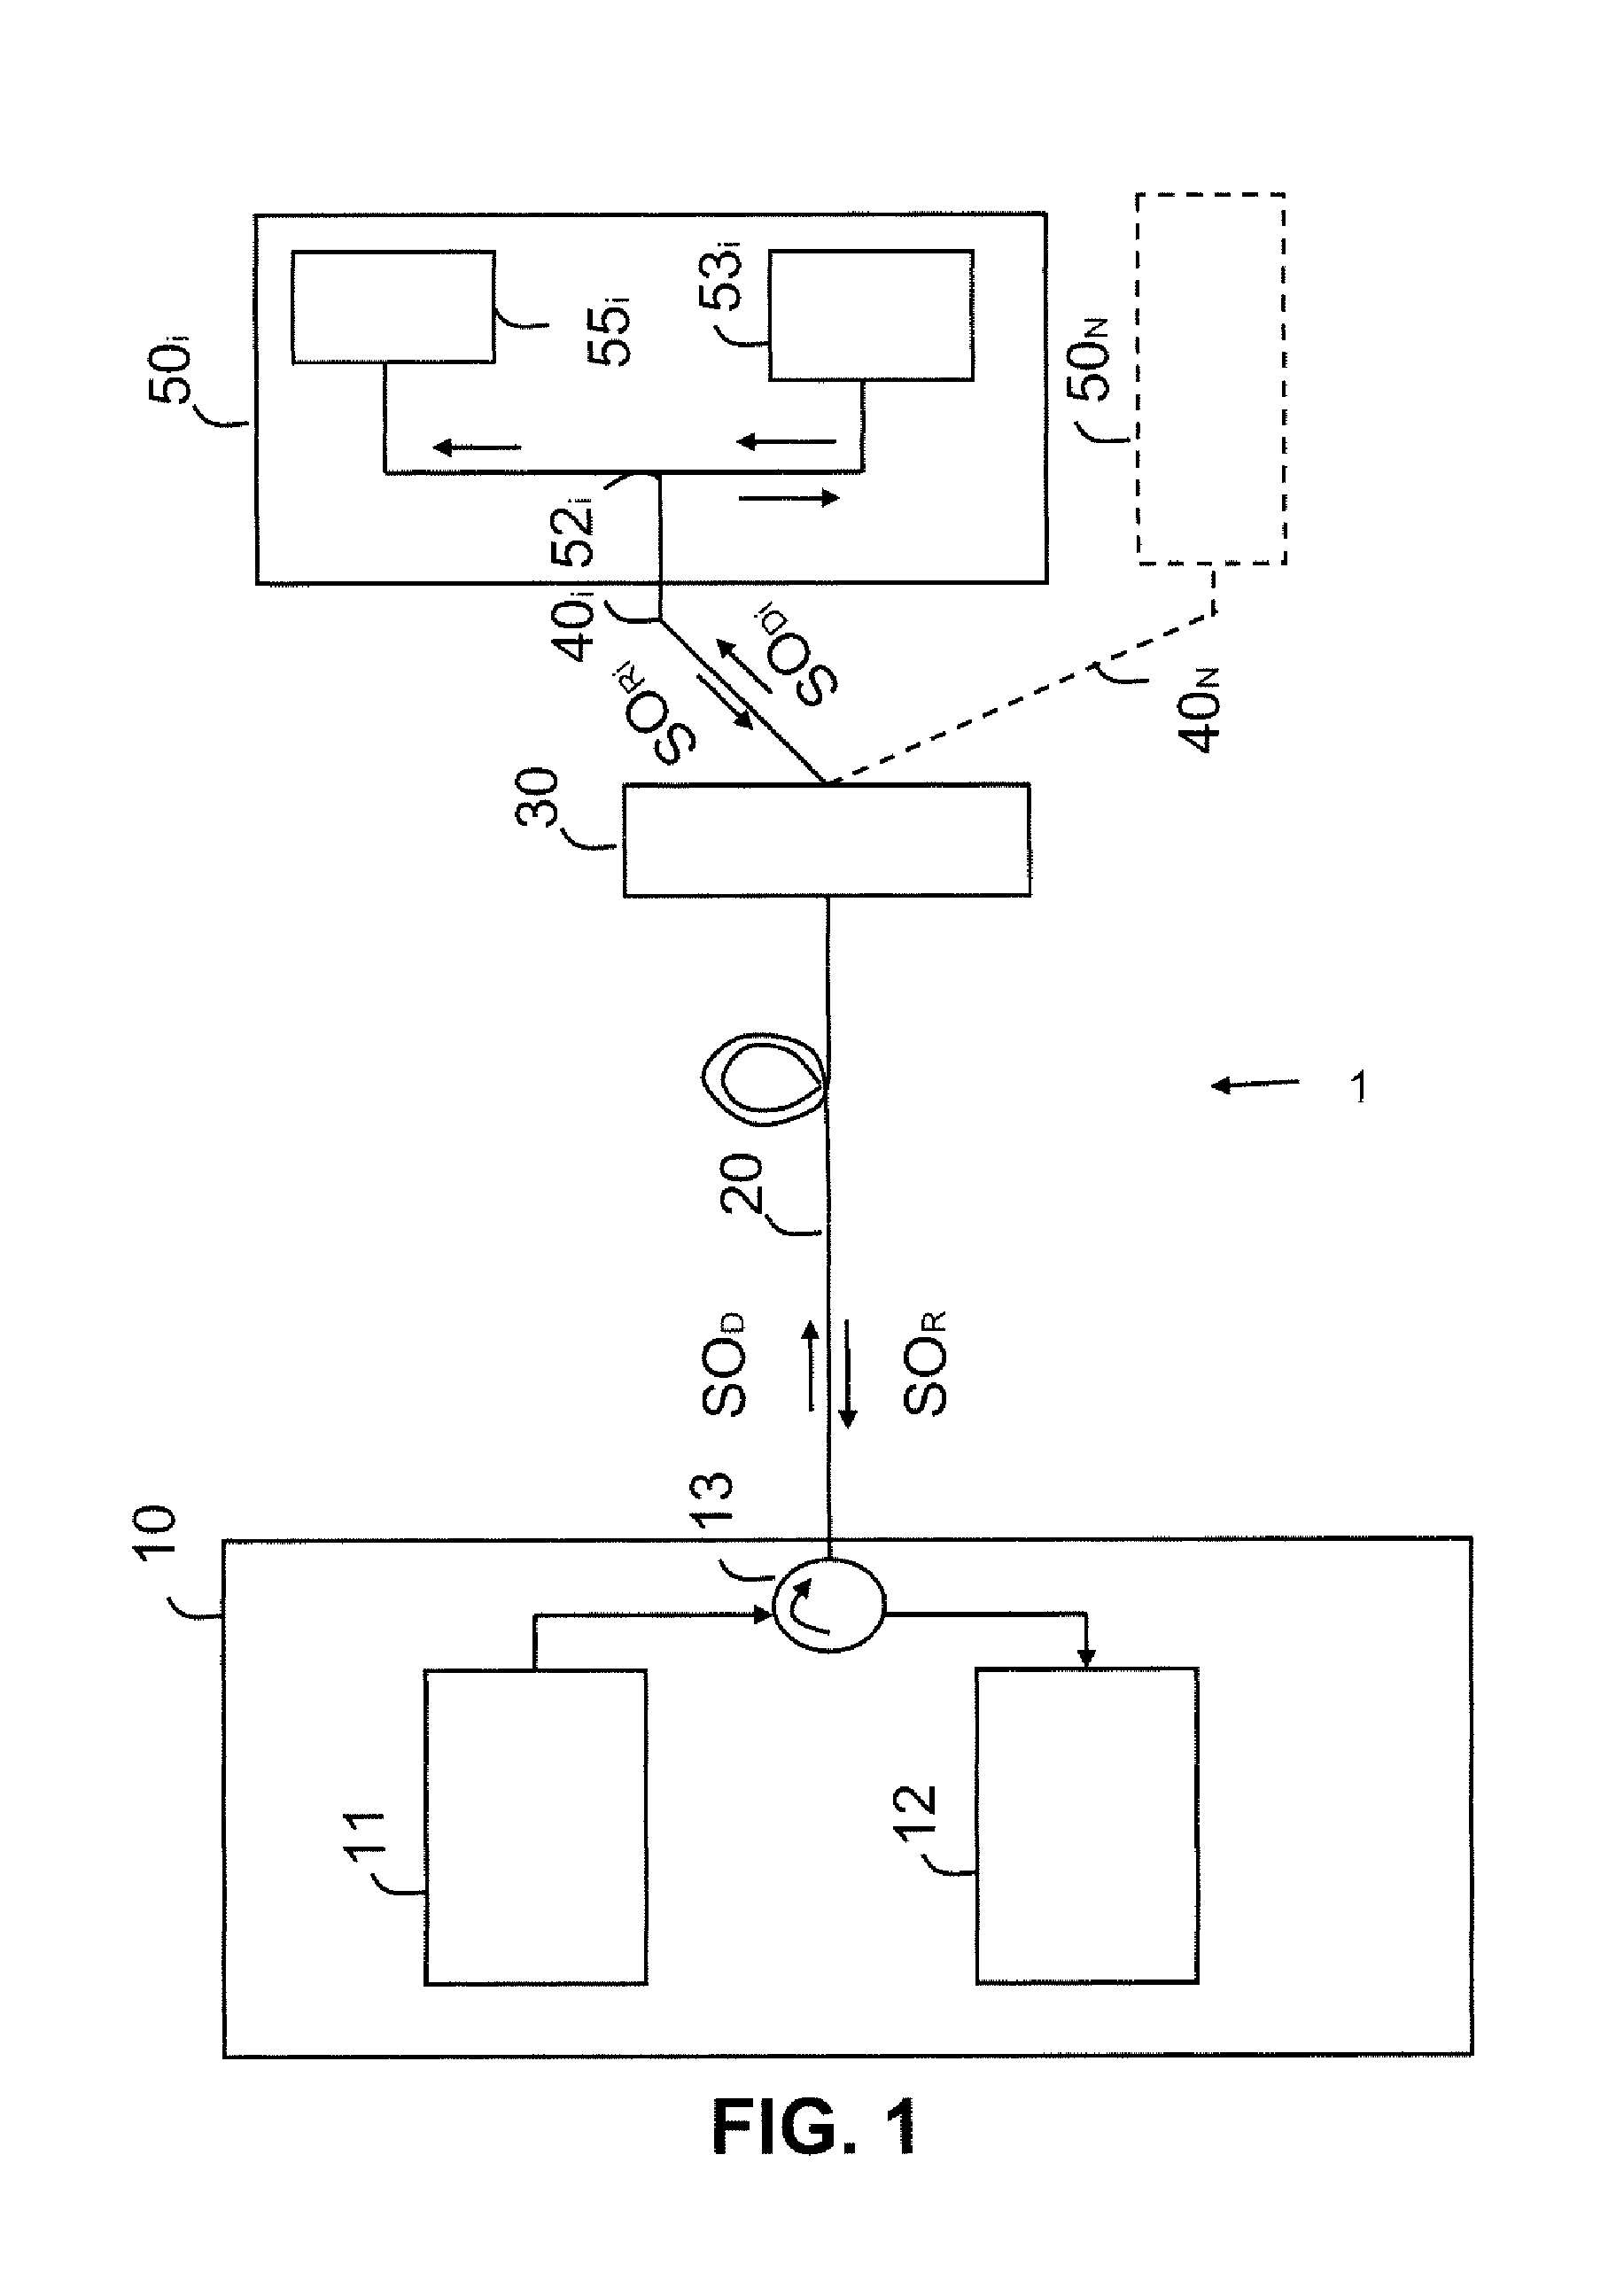 High bit rate bidirectional passive optical network, associated optical exchange and line termination device